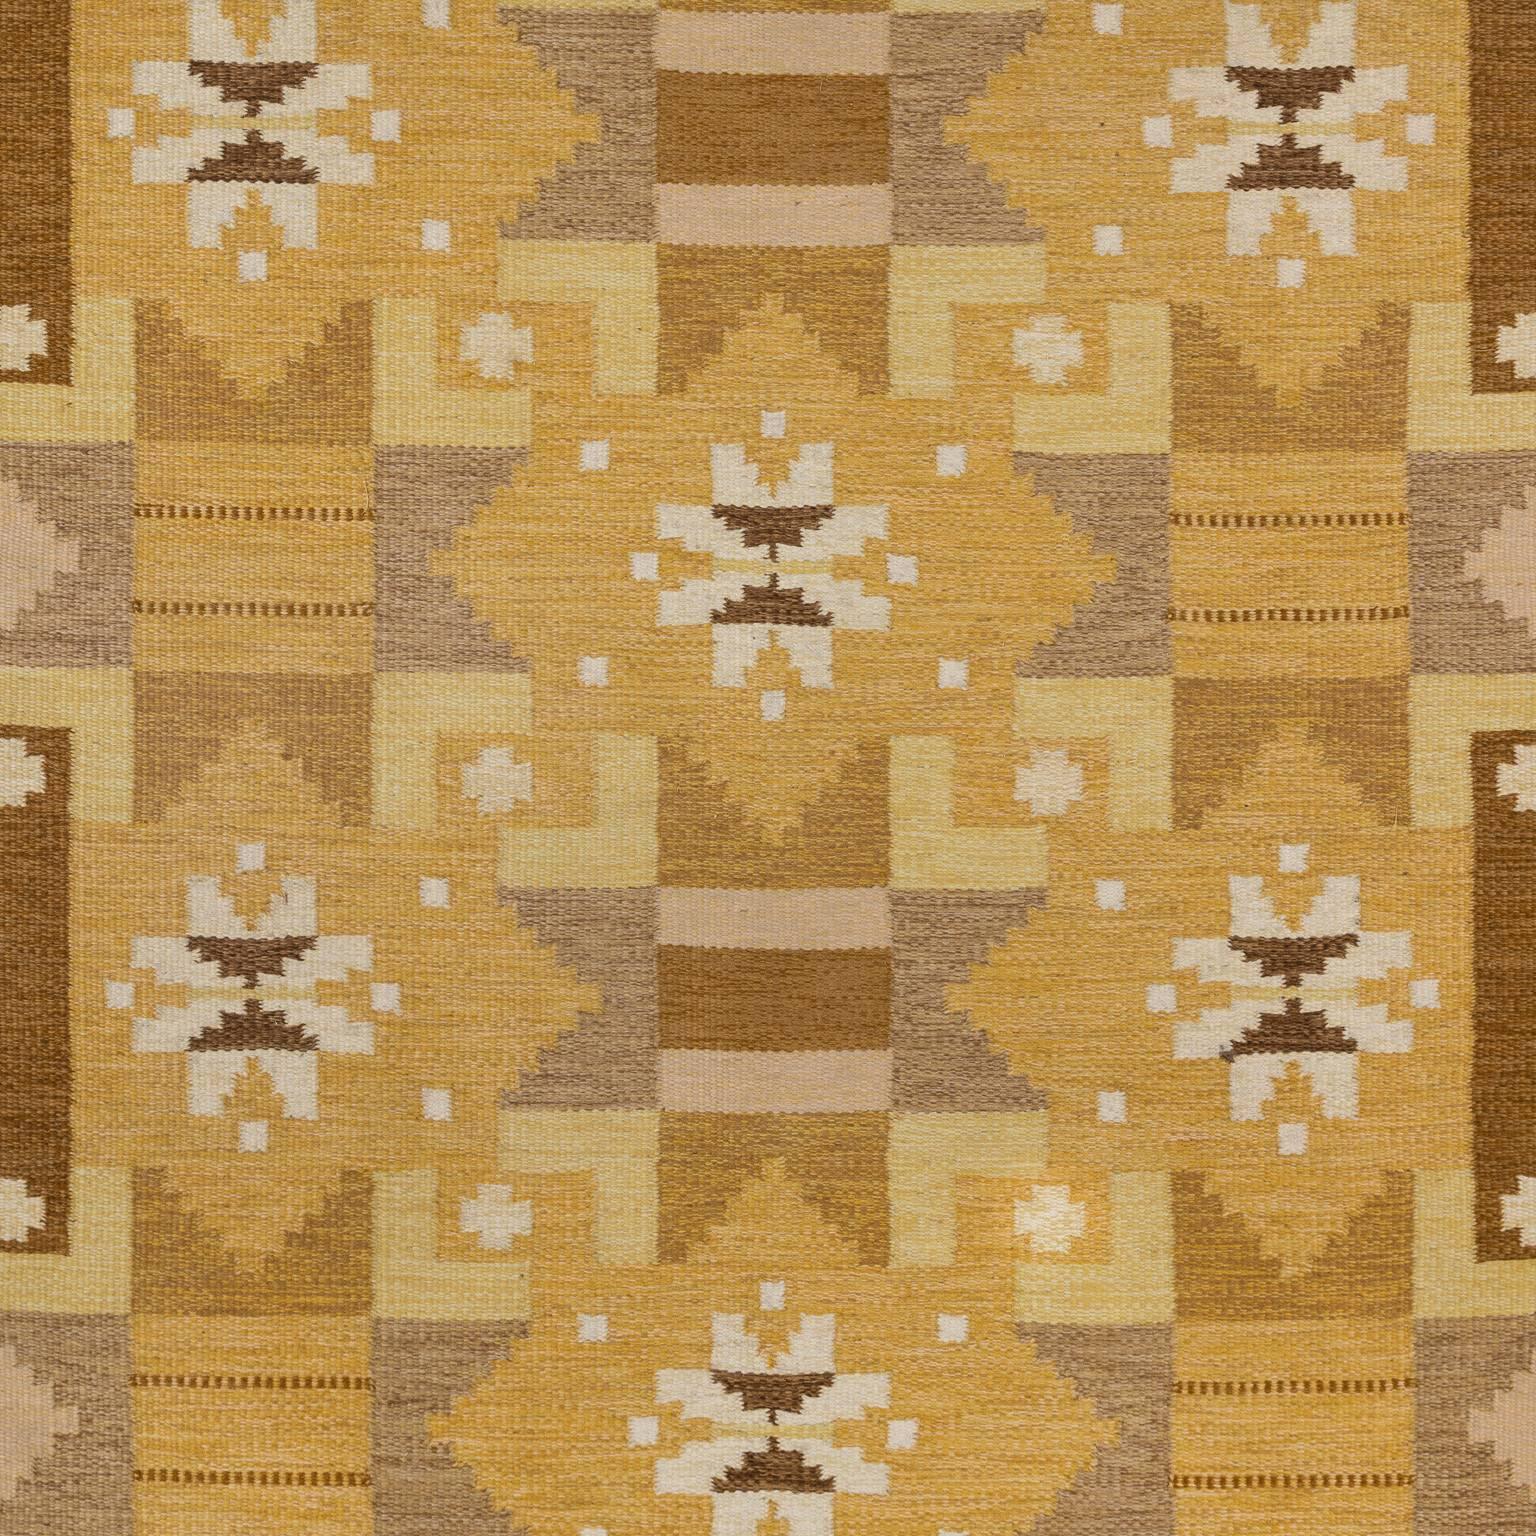 An appealing, warm and welcoming rug from the Scandinavia Modern era. Characterized by an exciting and complex design of geometric figures. This lovely vintage kelim features a pallet of yellow and tan. Sophisticated composition with a posh energy.